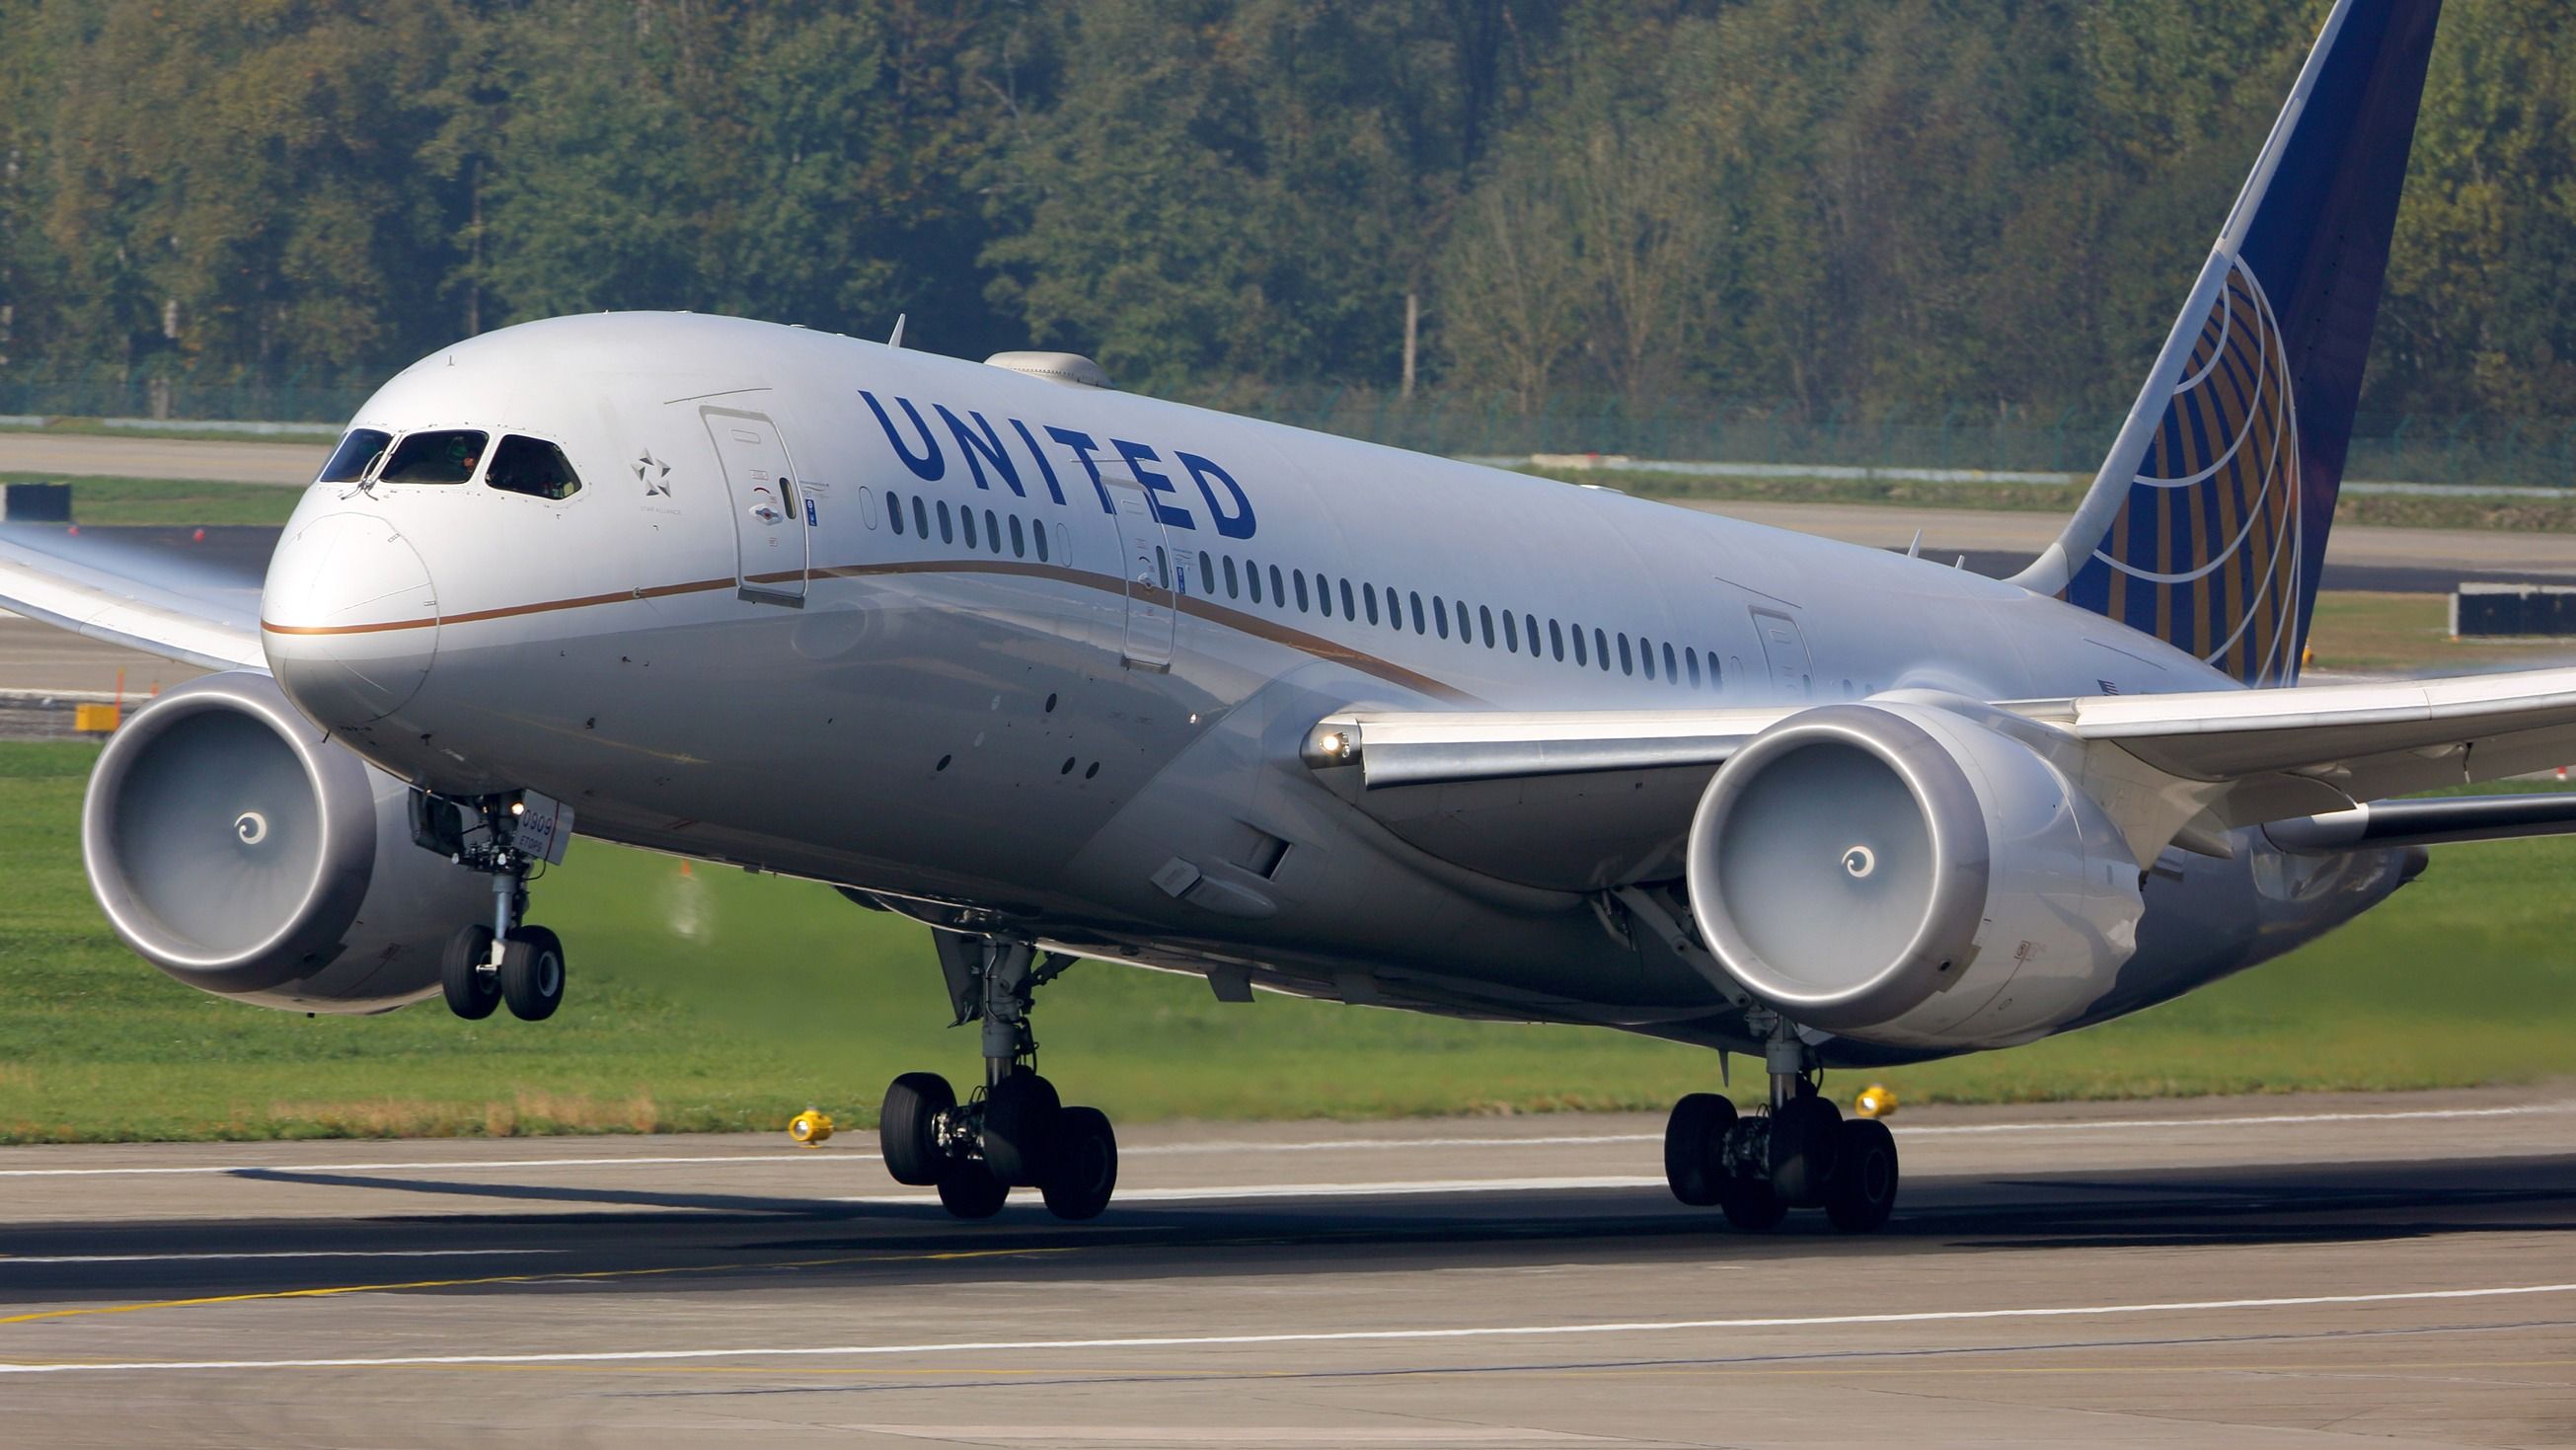 United Airlines Moves Up Flights Between Chicago O'Hare & Milano Malpensa Airports